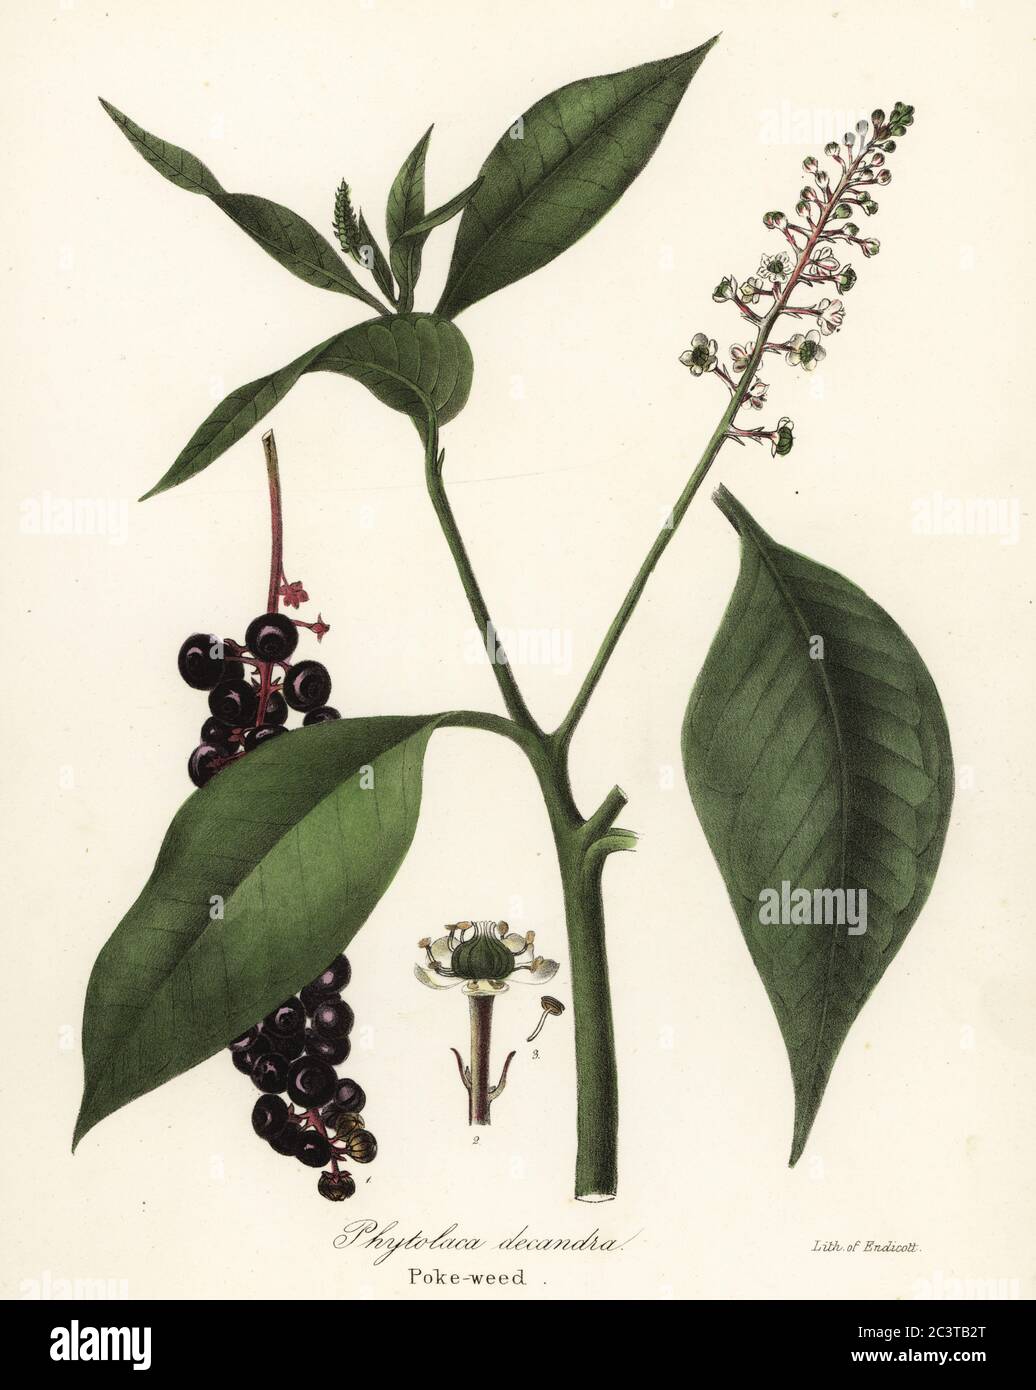 Pokeweed, Phytolacca americana (Phytolaca decandra). Handcoloured lithograph by Endicott after a botanical illustration from John Torrey’s A Flora of the State of New York, Carroll and Cook, Albany, 1843. The plates drawn by John Torrey, Agnes Mitchell, Elizabeth Paoley and Swinton. John Torrey was an American botanist, chemist and physician 1796-1873. Stock Photo